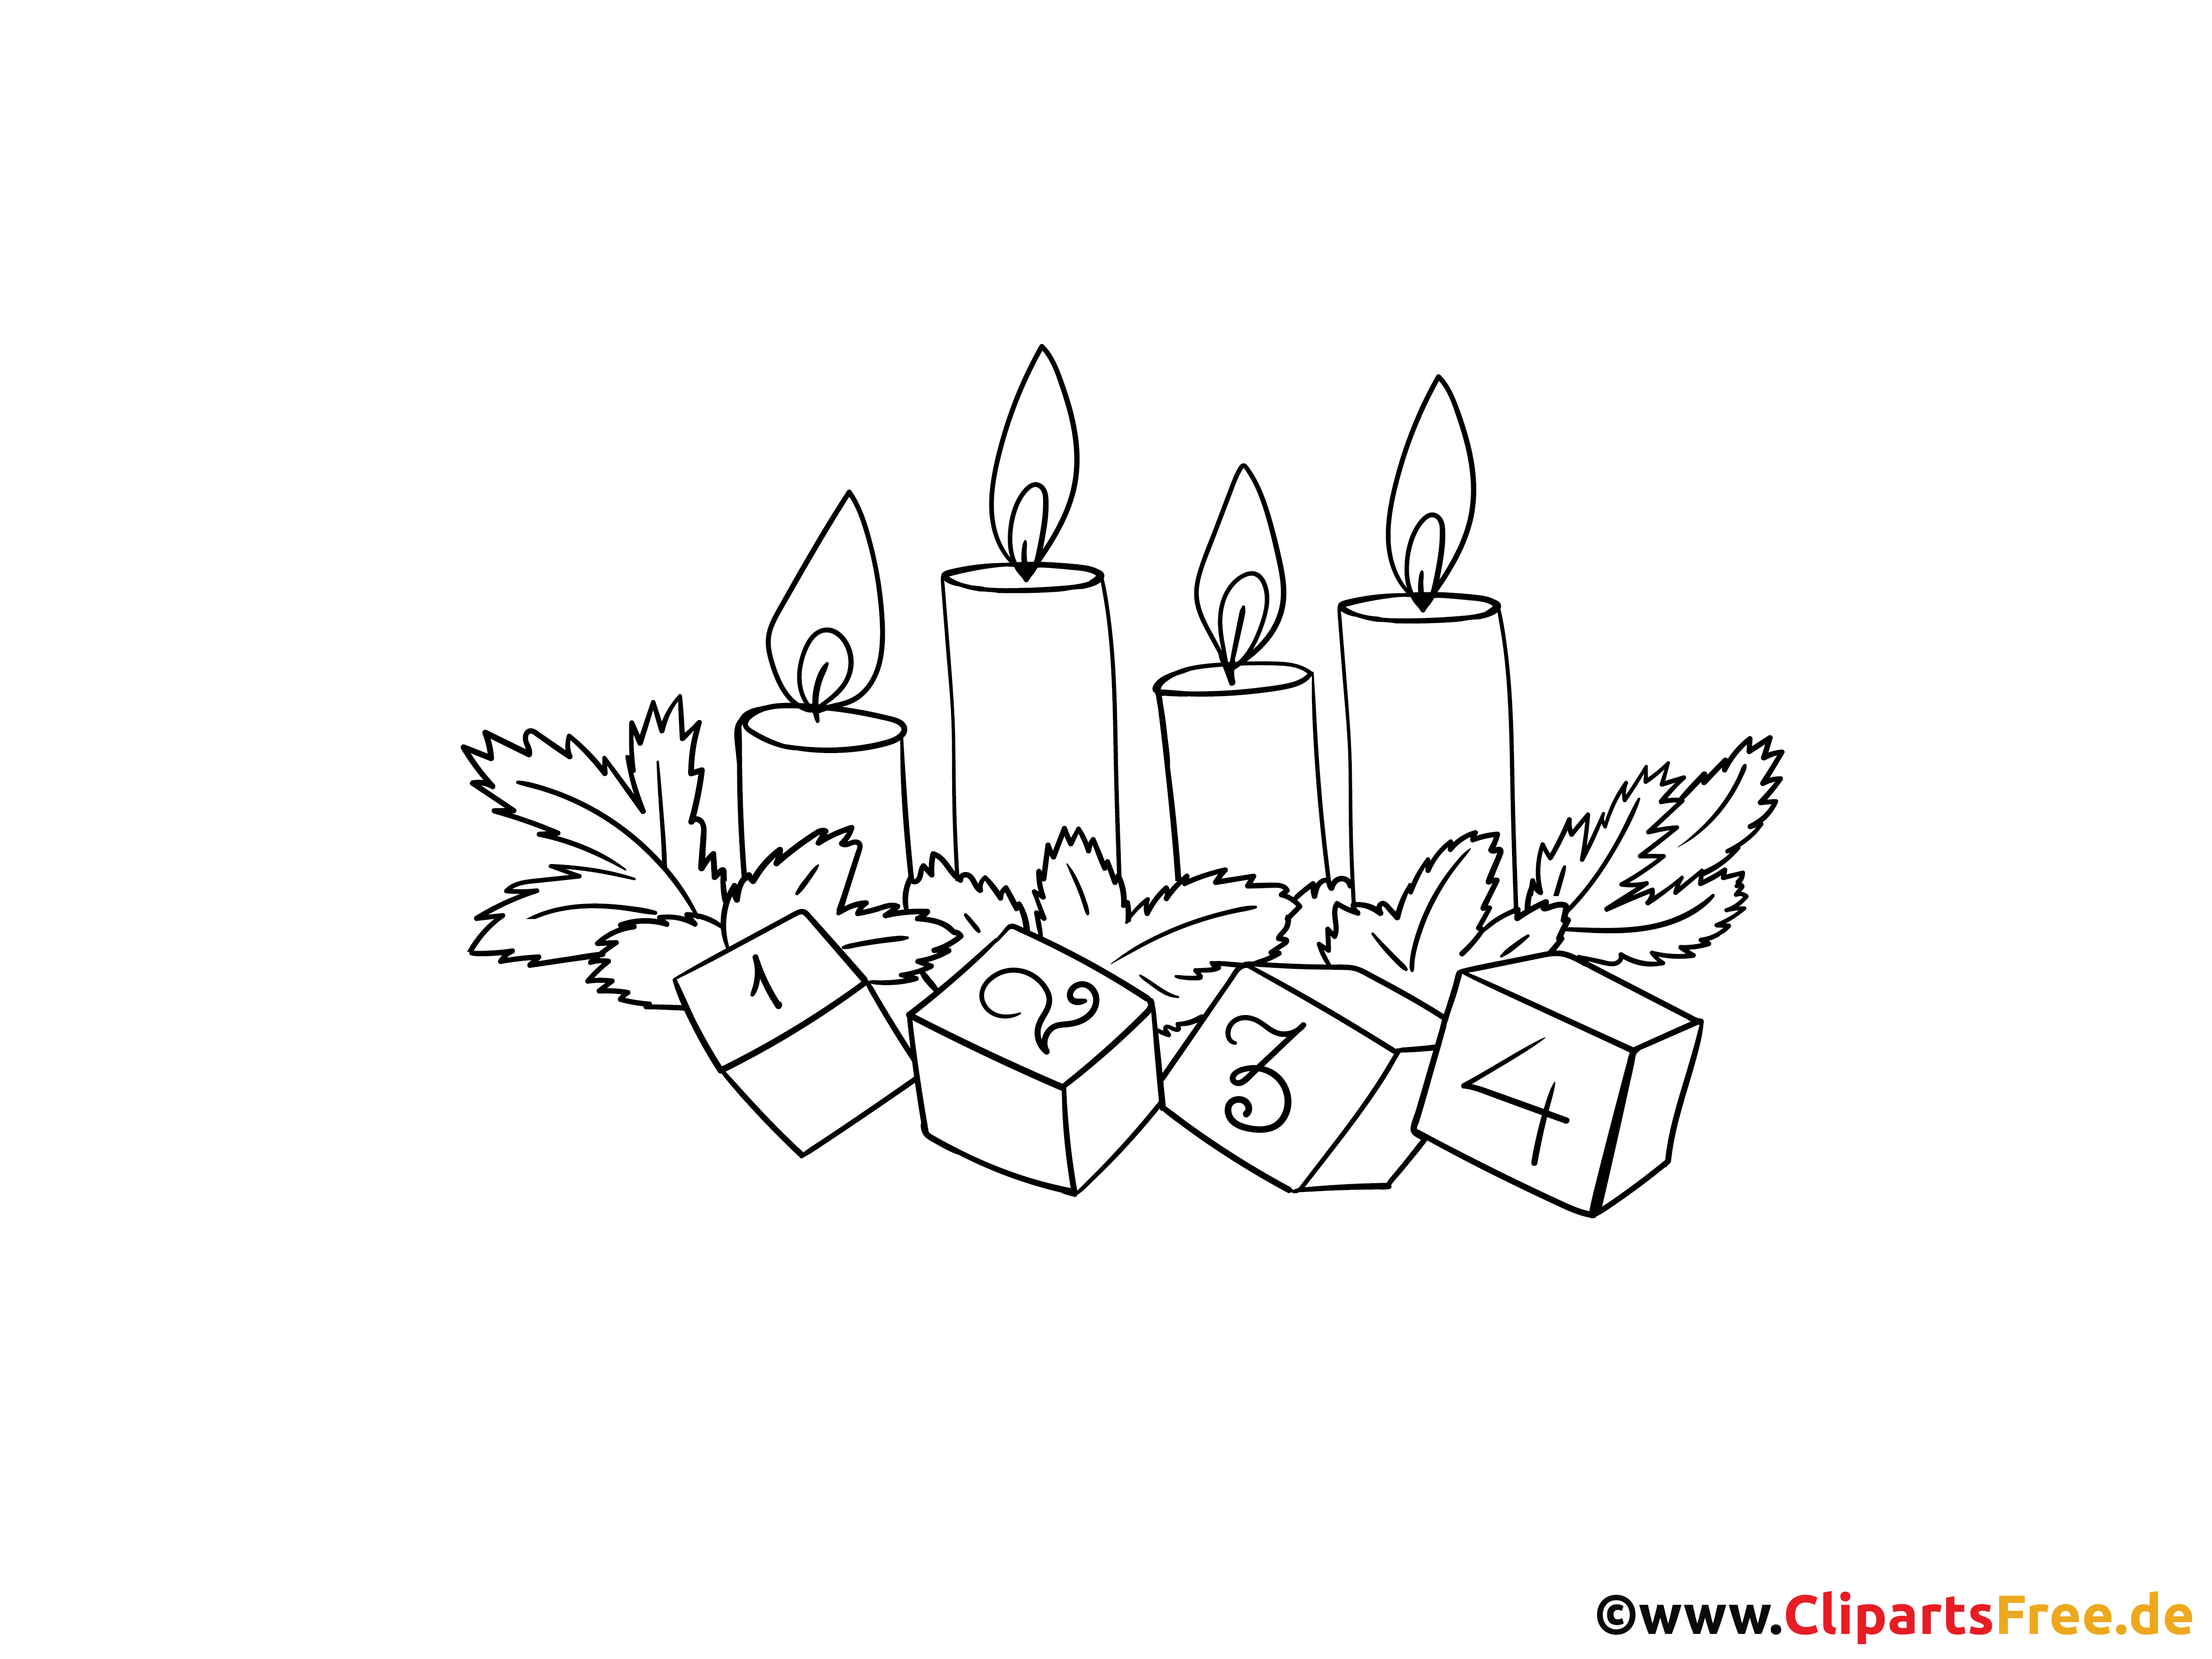 Black and white clipart for Advent to print. 